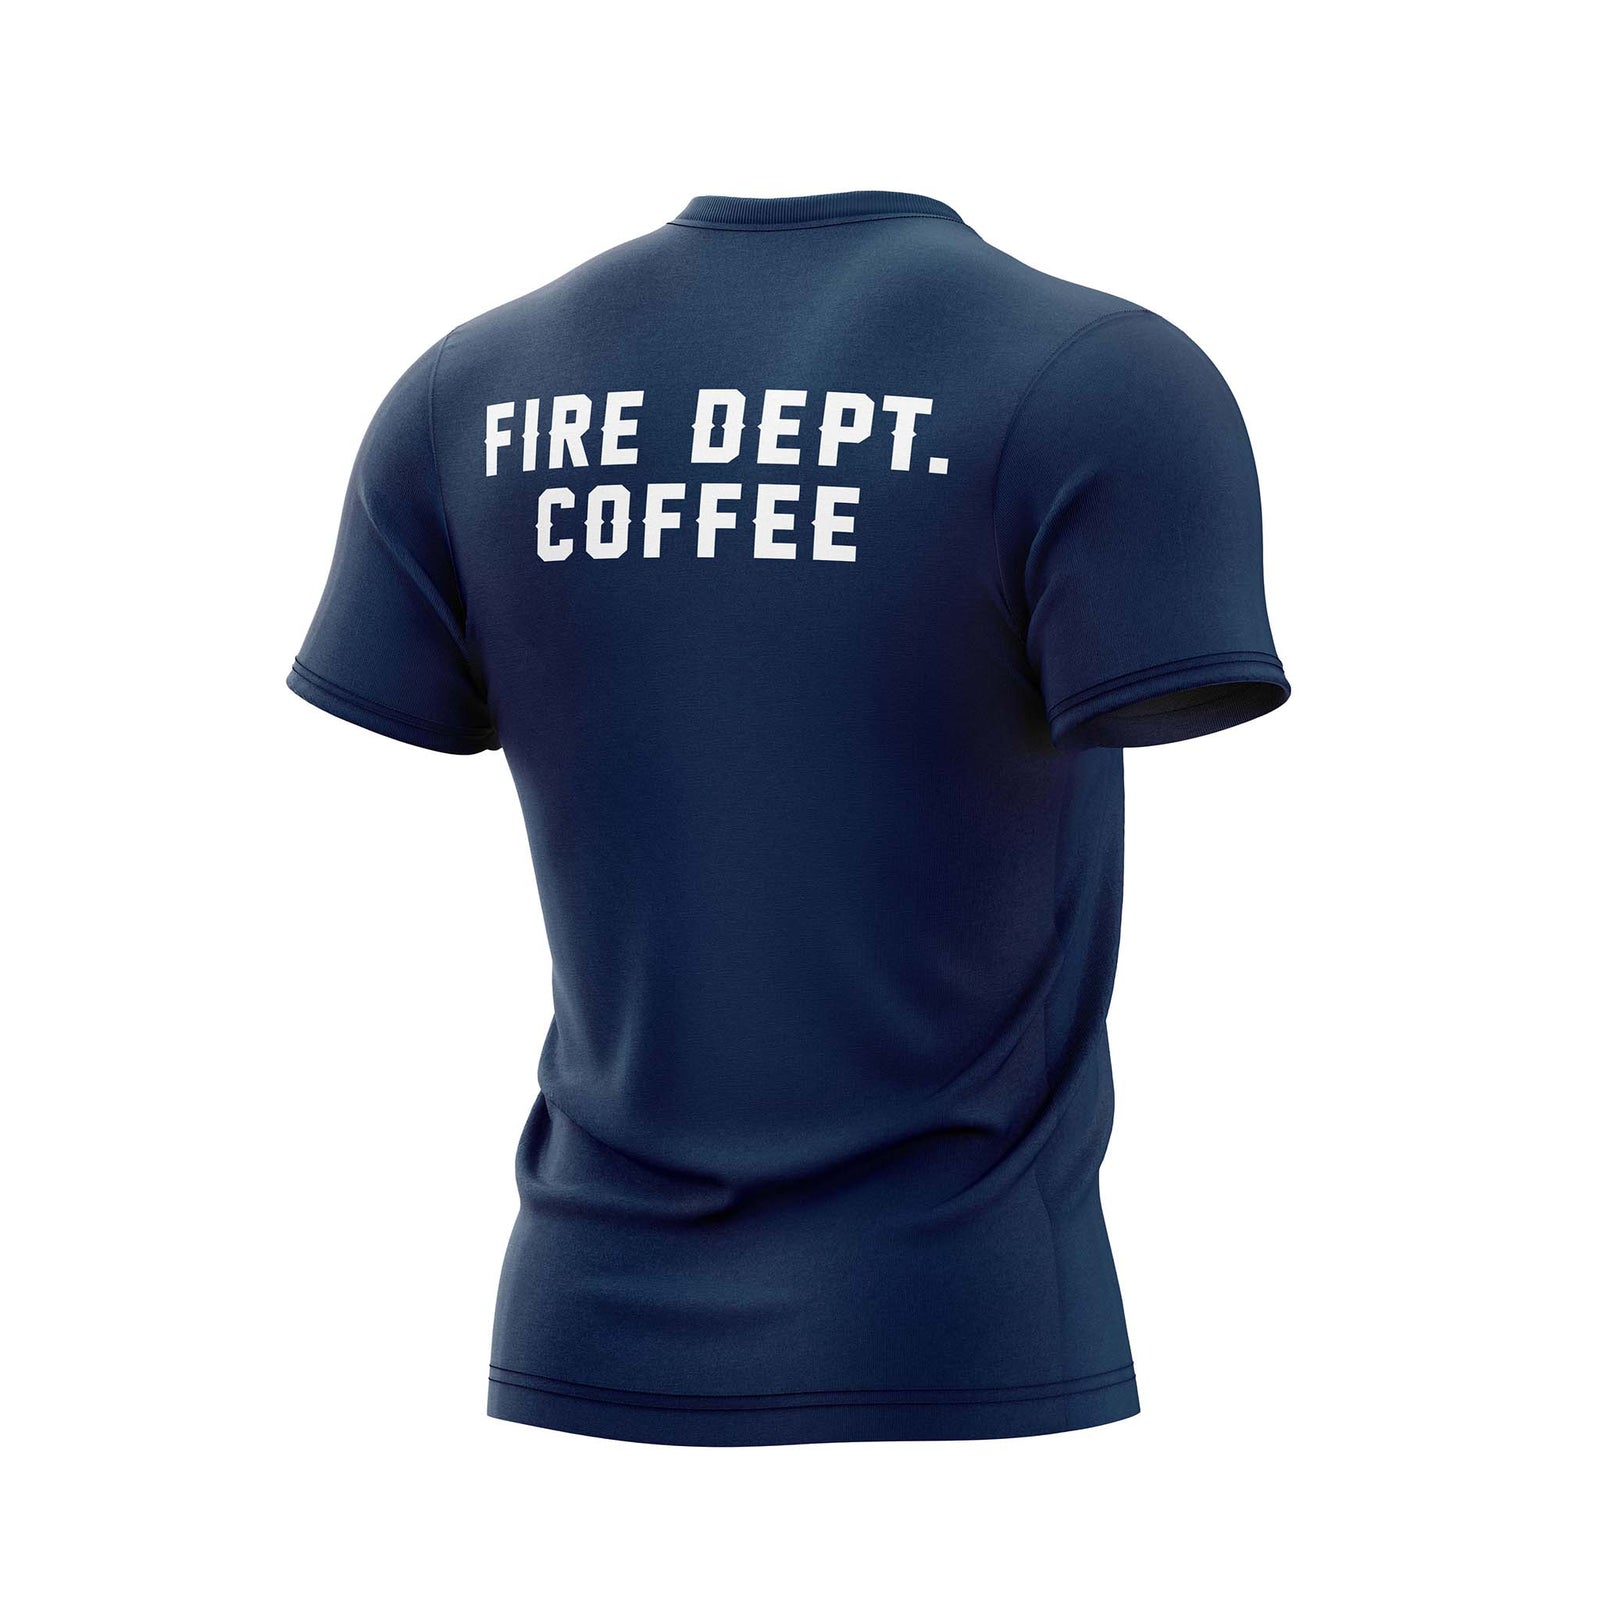 Back of navy shirt with "Fire Dept. Coffee" written in large, white letters across the top of the back.